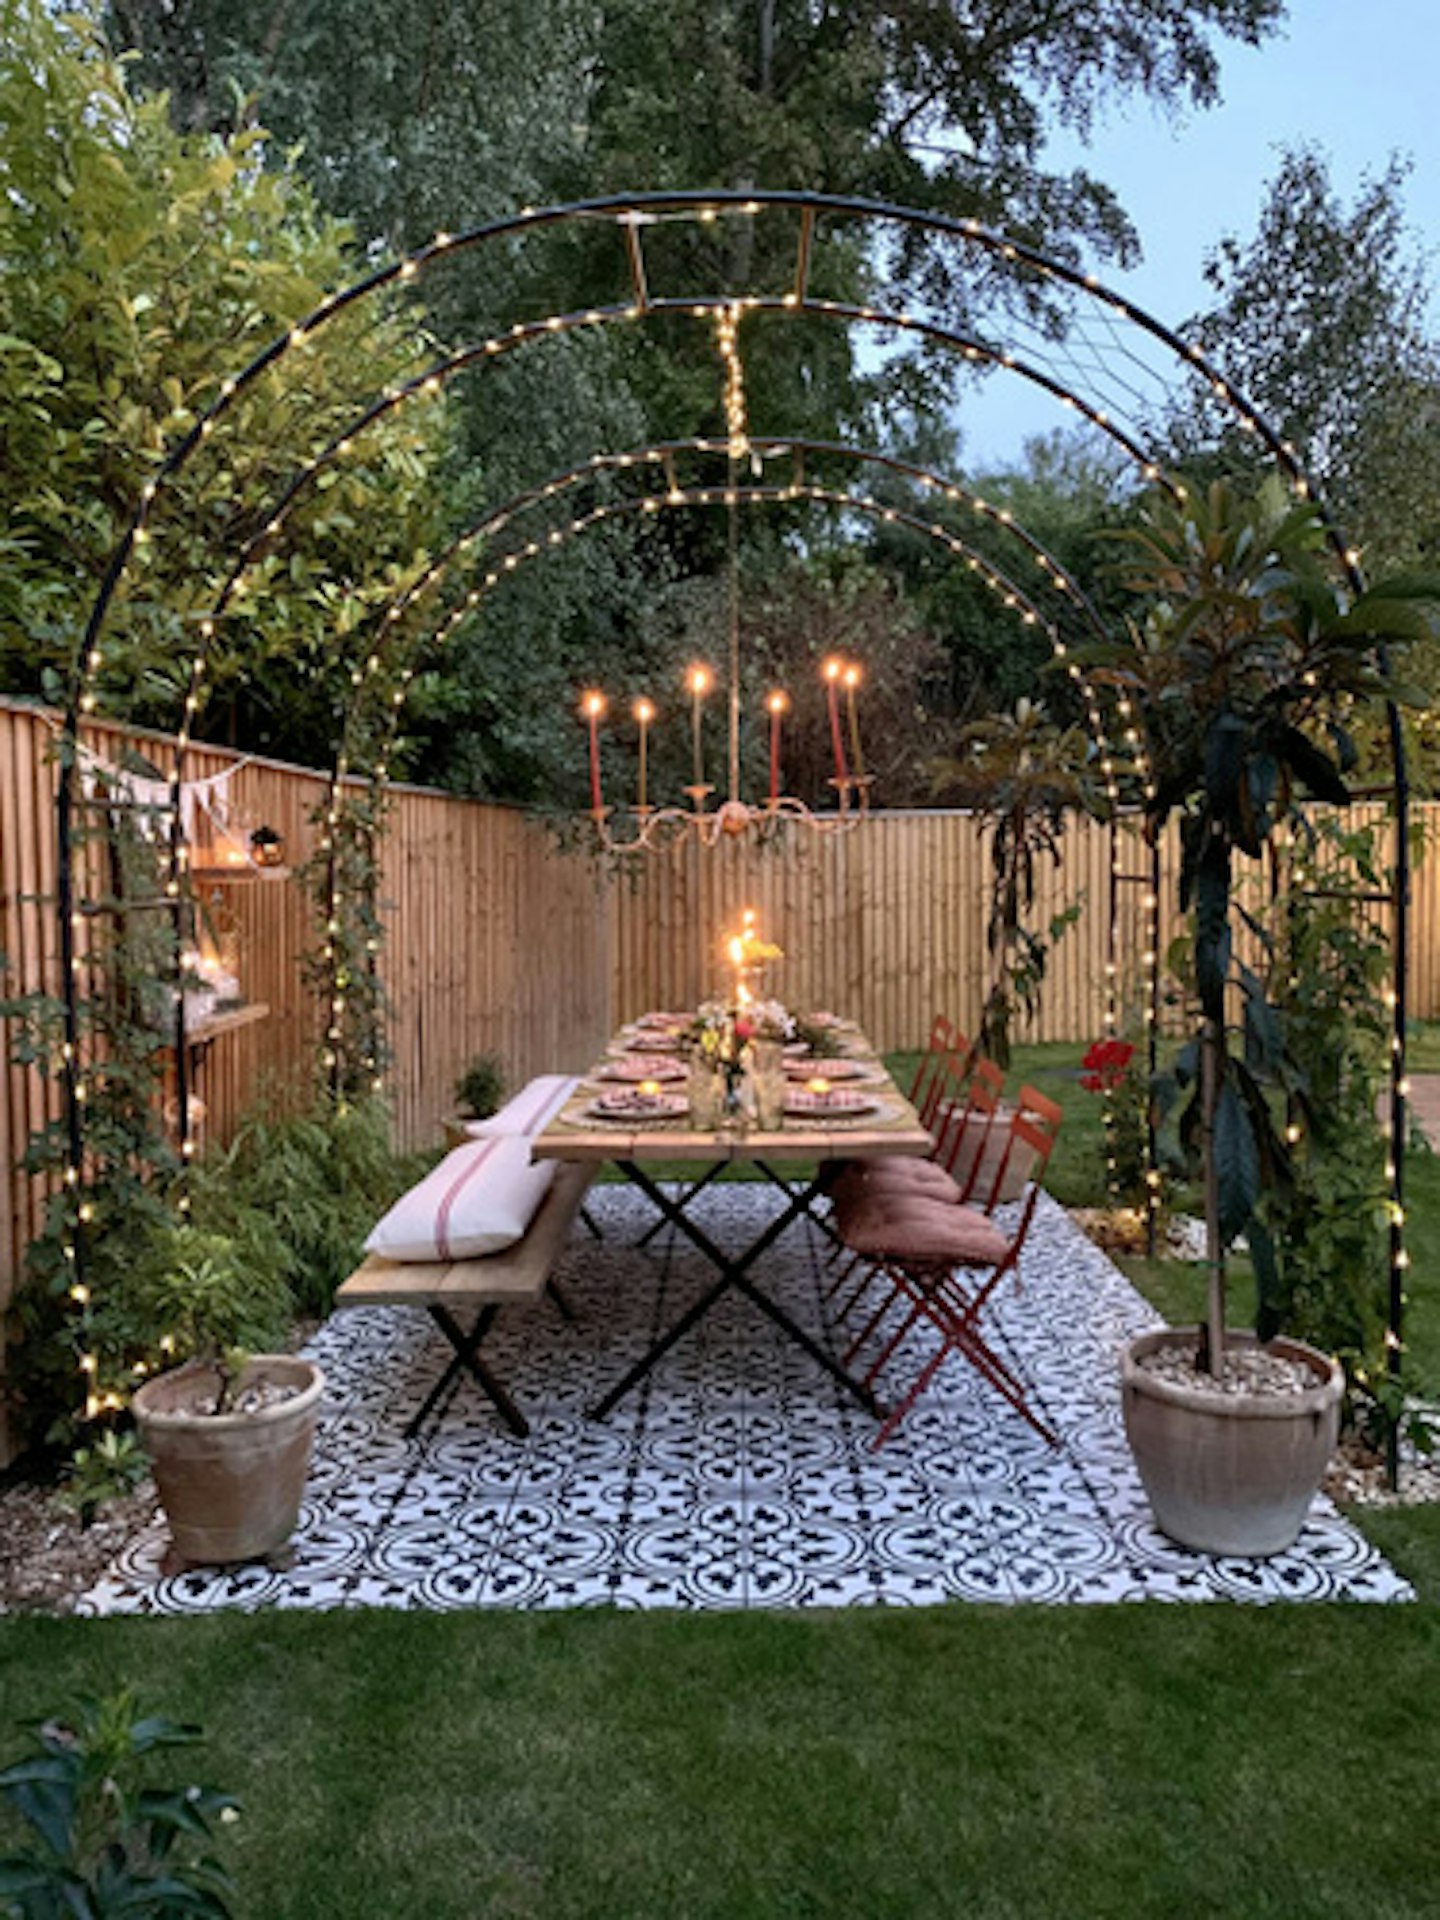 garden dining table lit up with overhead fairylights